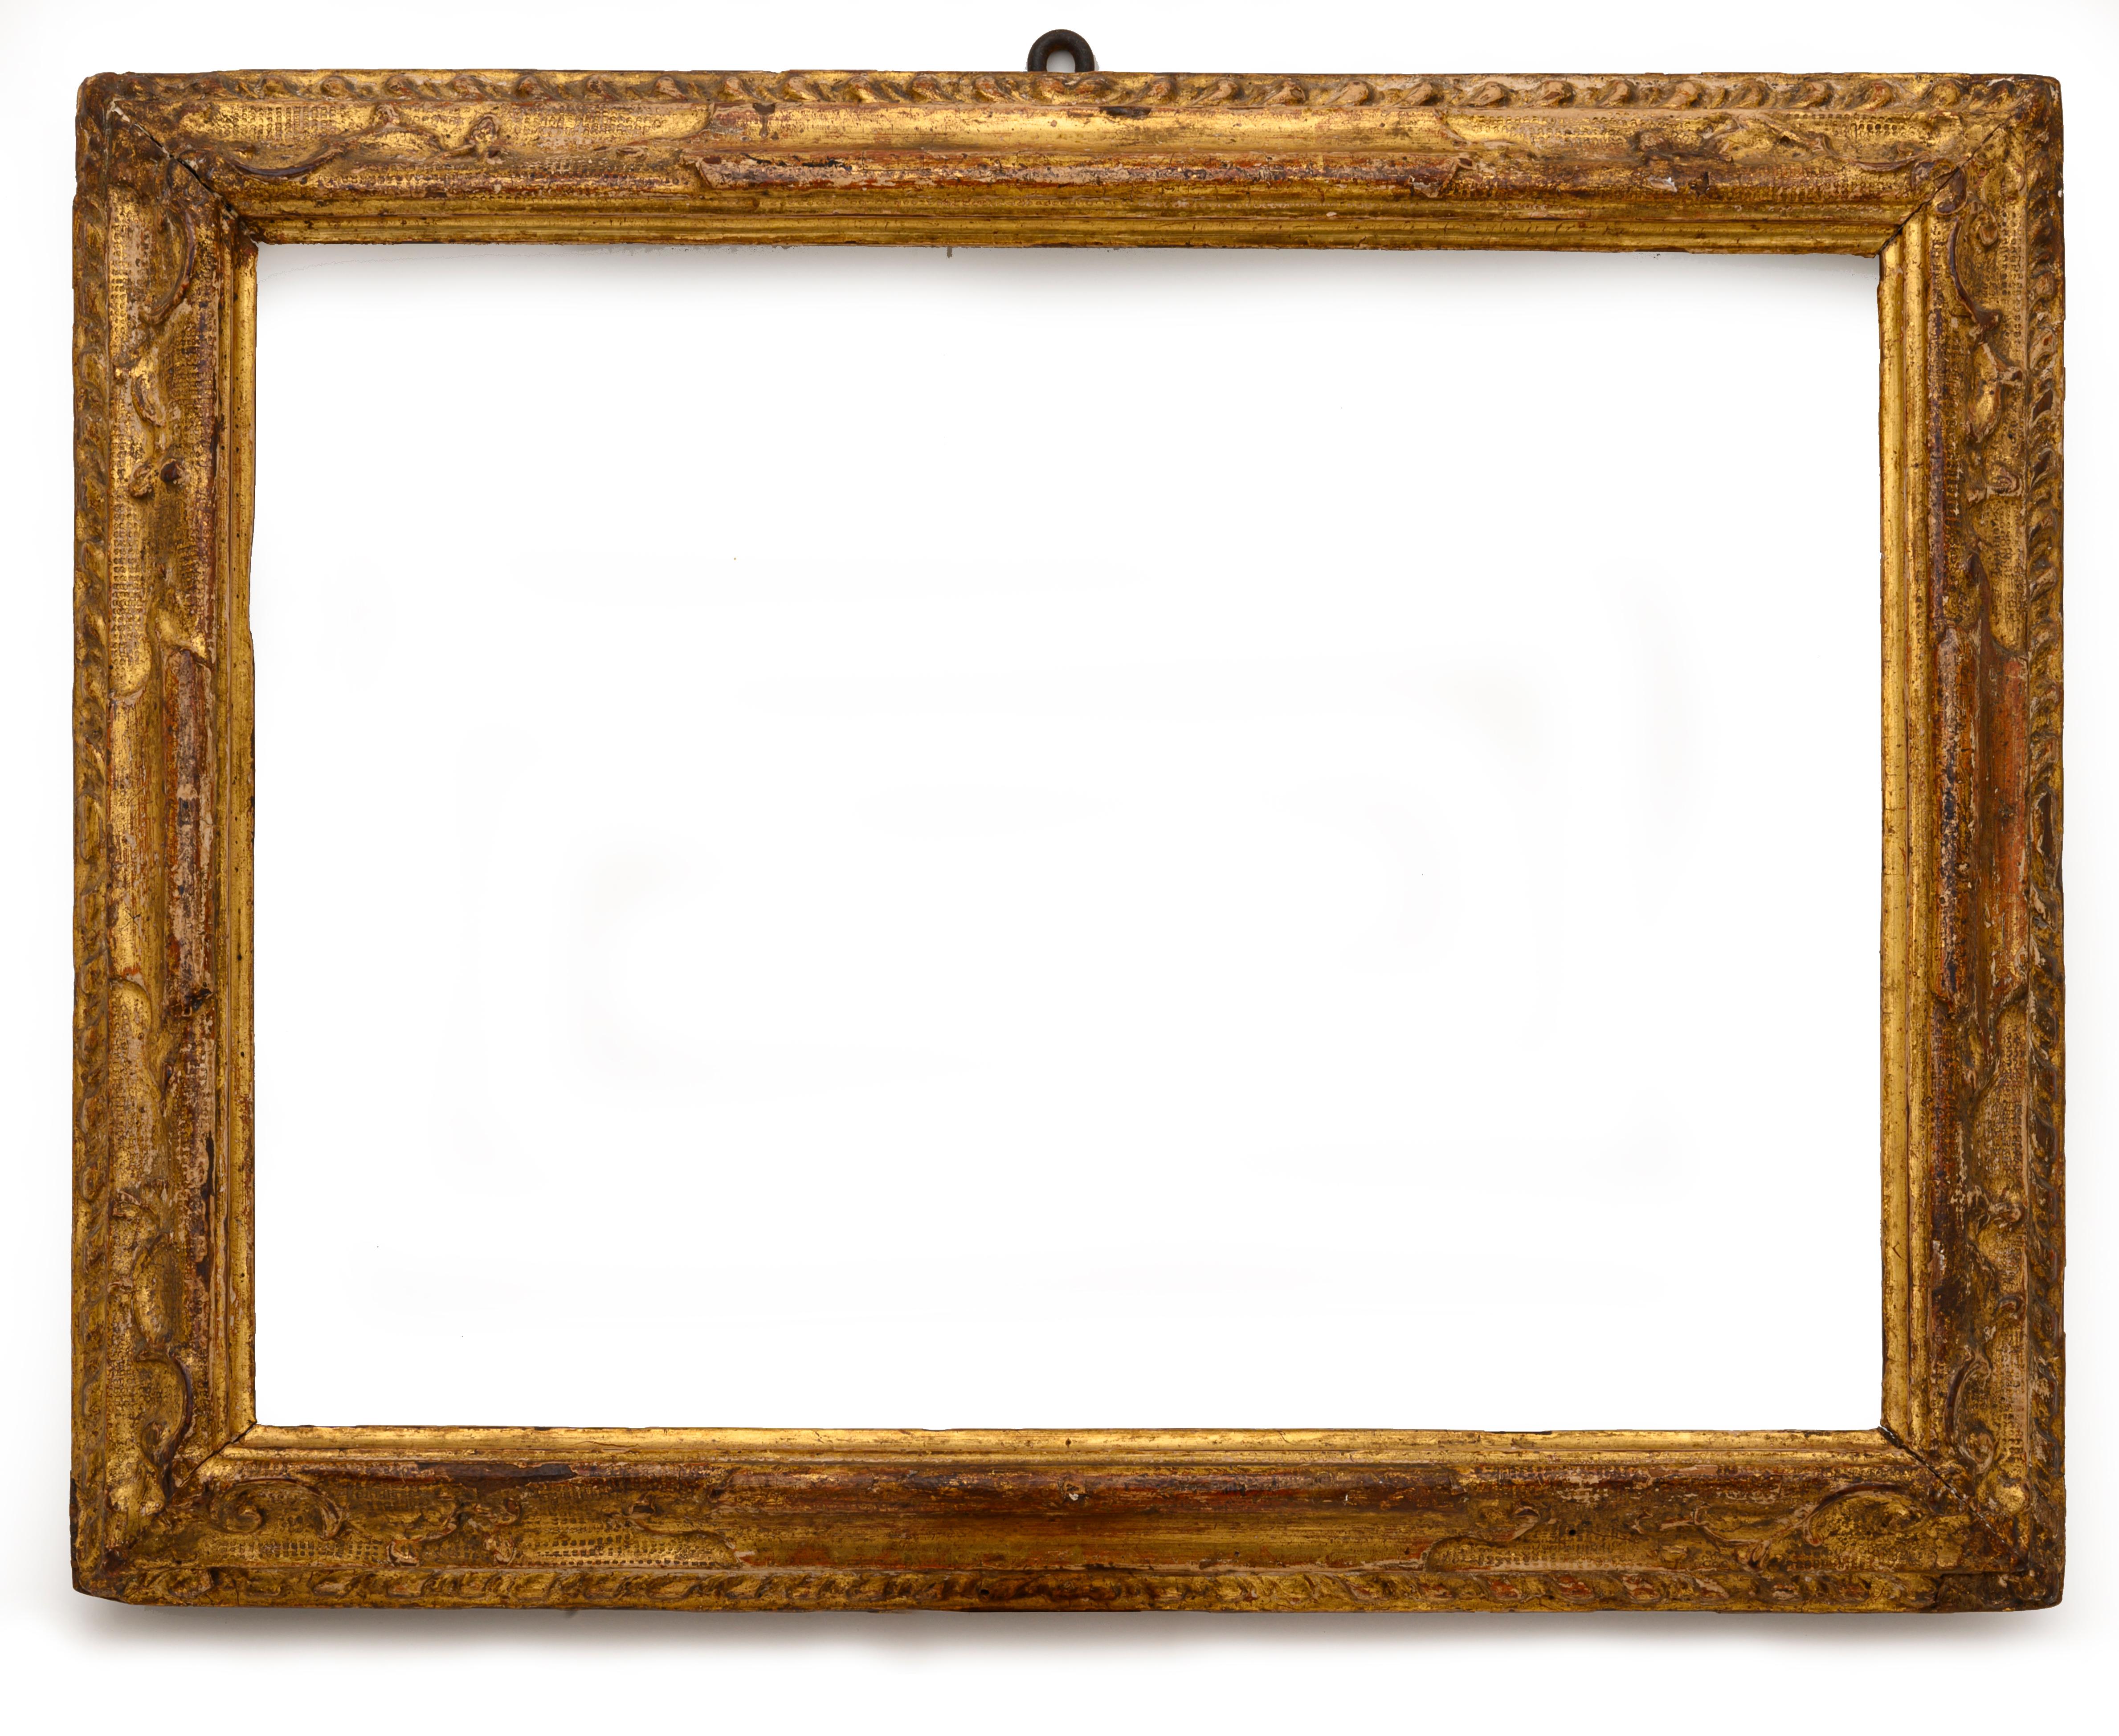 18th century Italian giltwood Frame realized in fir with a lovely original gilding. Rectangular shape, could be hanged horizontally or vertically. Beautiful hand-carving with scrolling motif and bulino engraving. Italy, 18th century. 
Good age